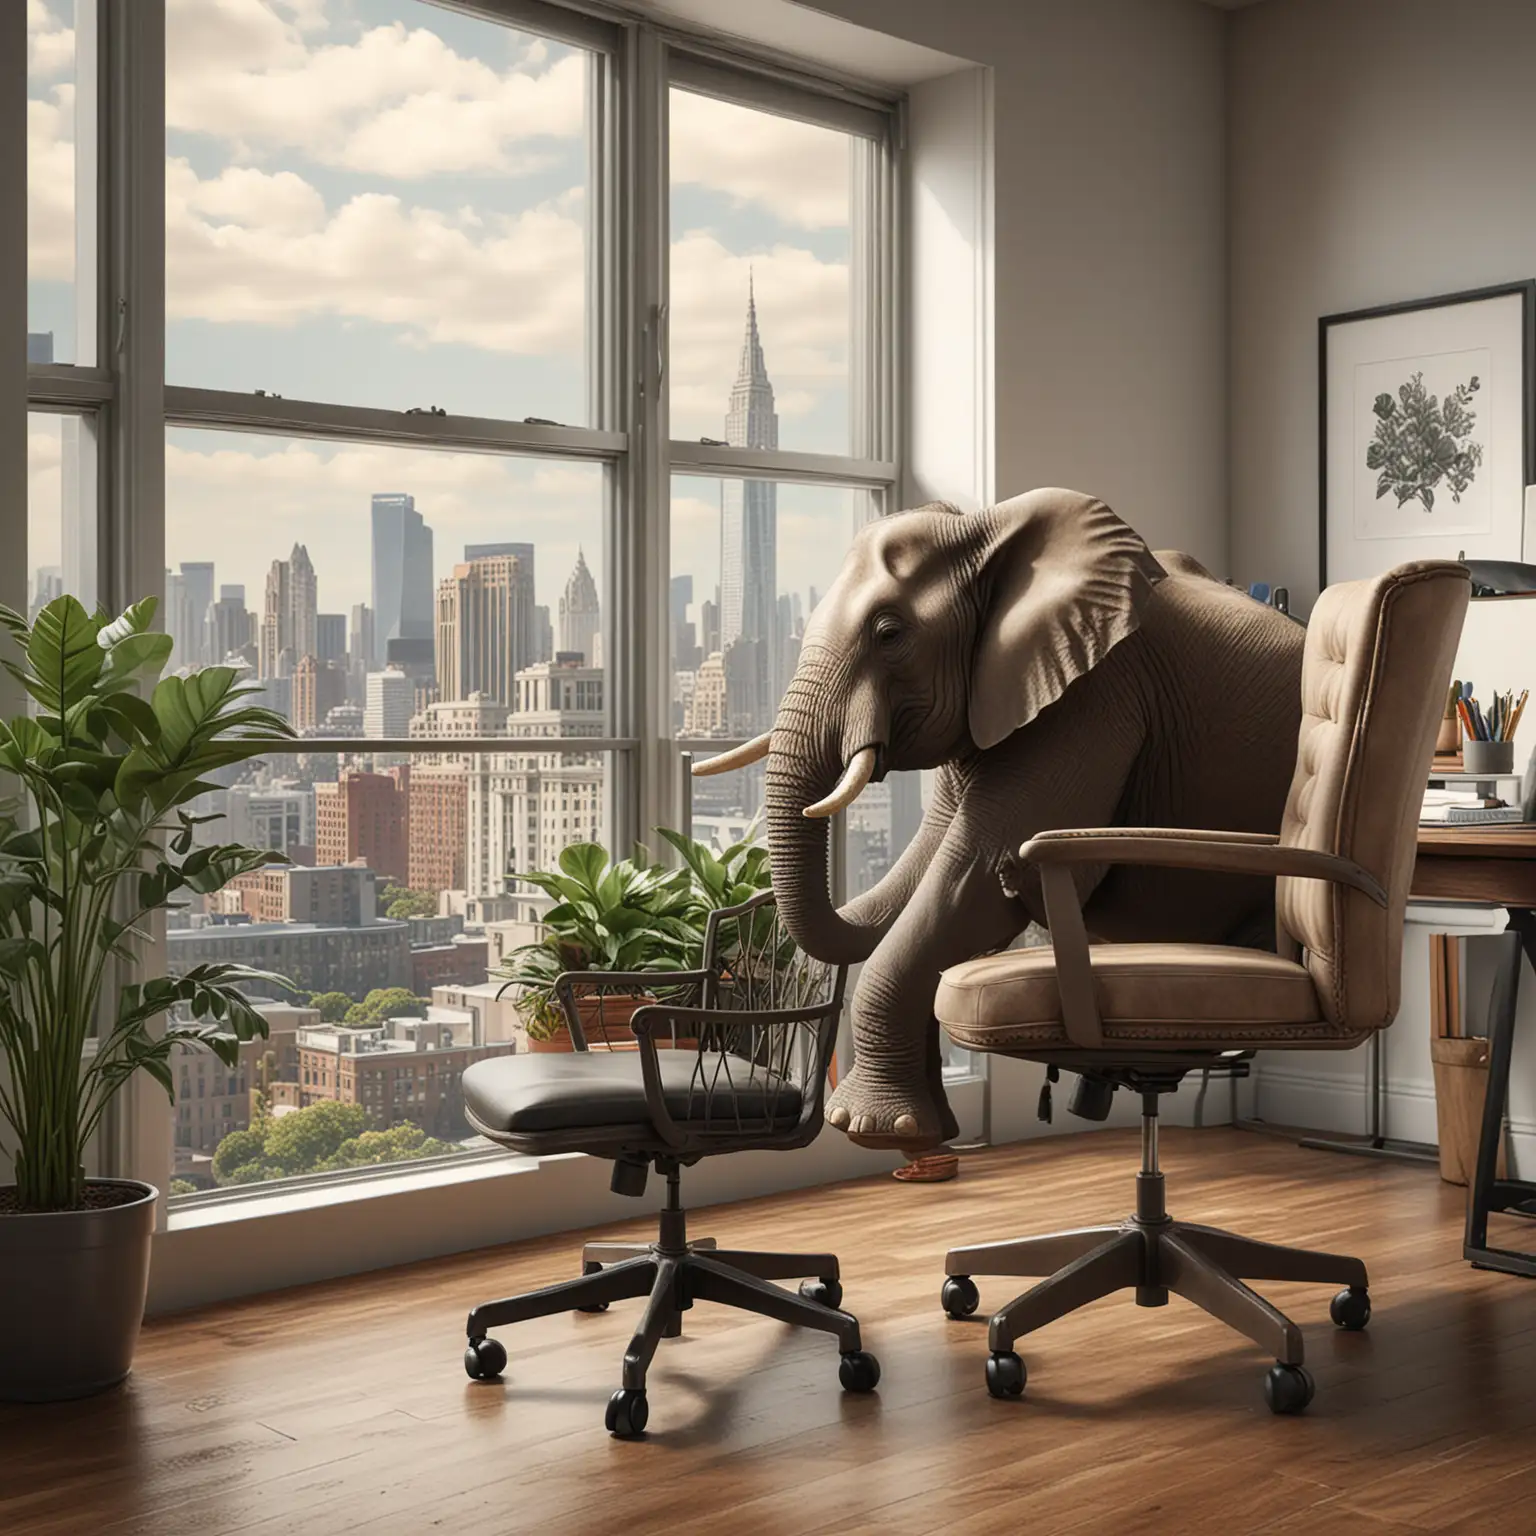 Professional Elephant Working at Laptop in Luxurious Office Setting